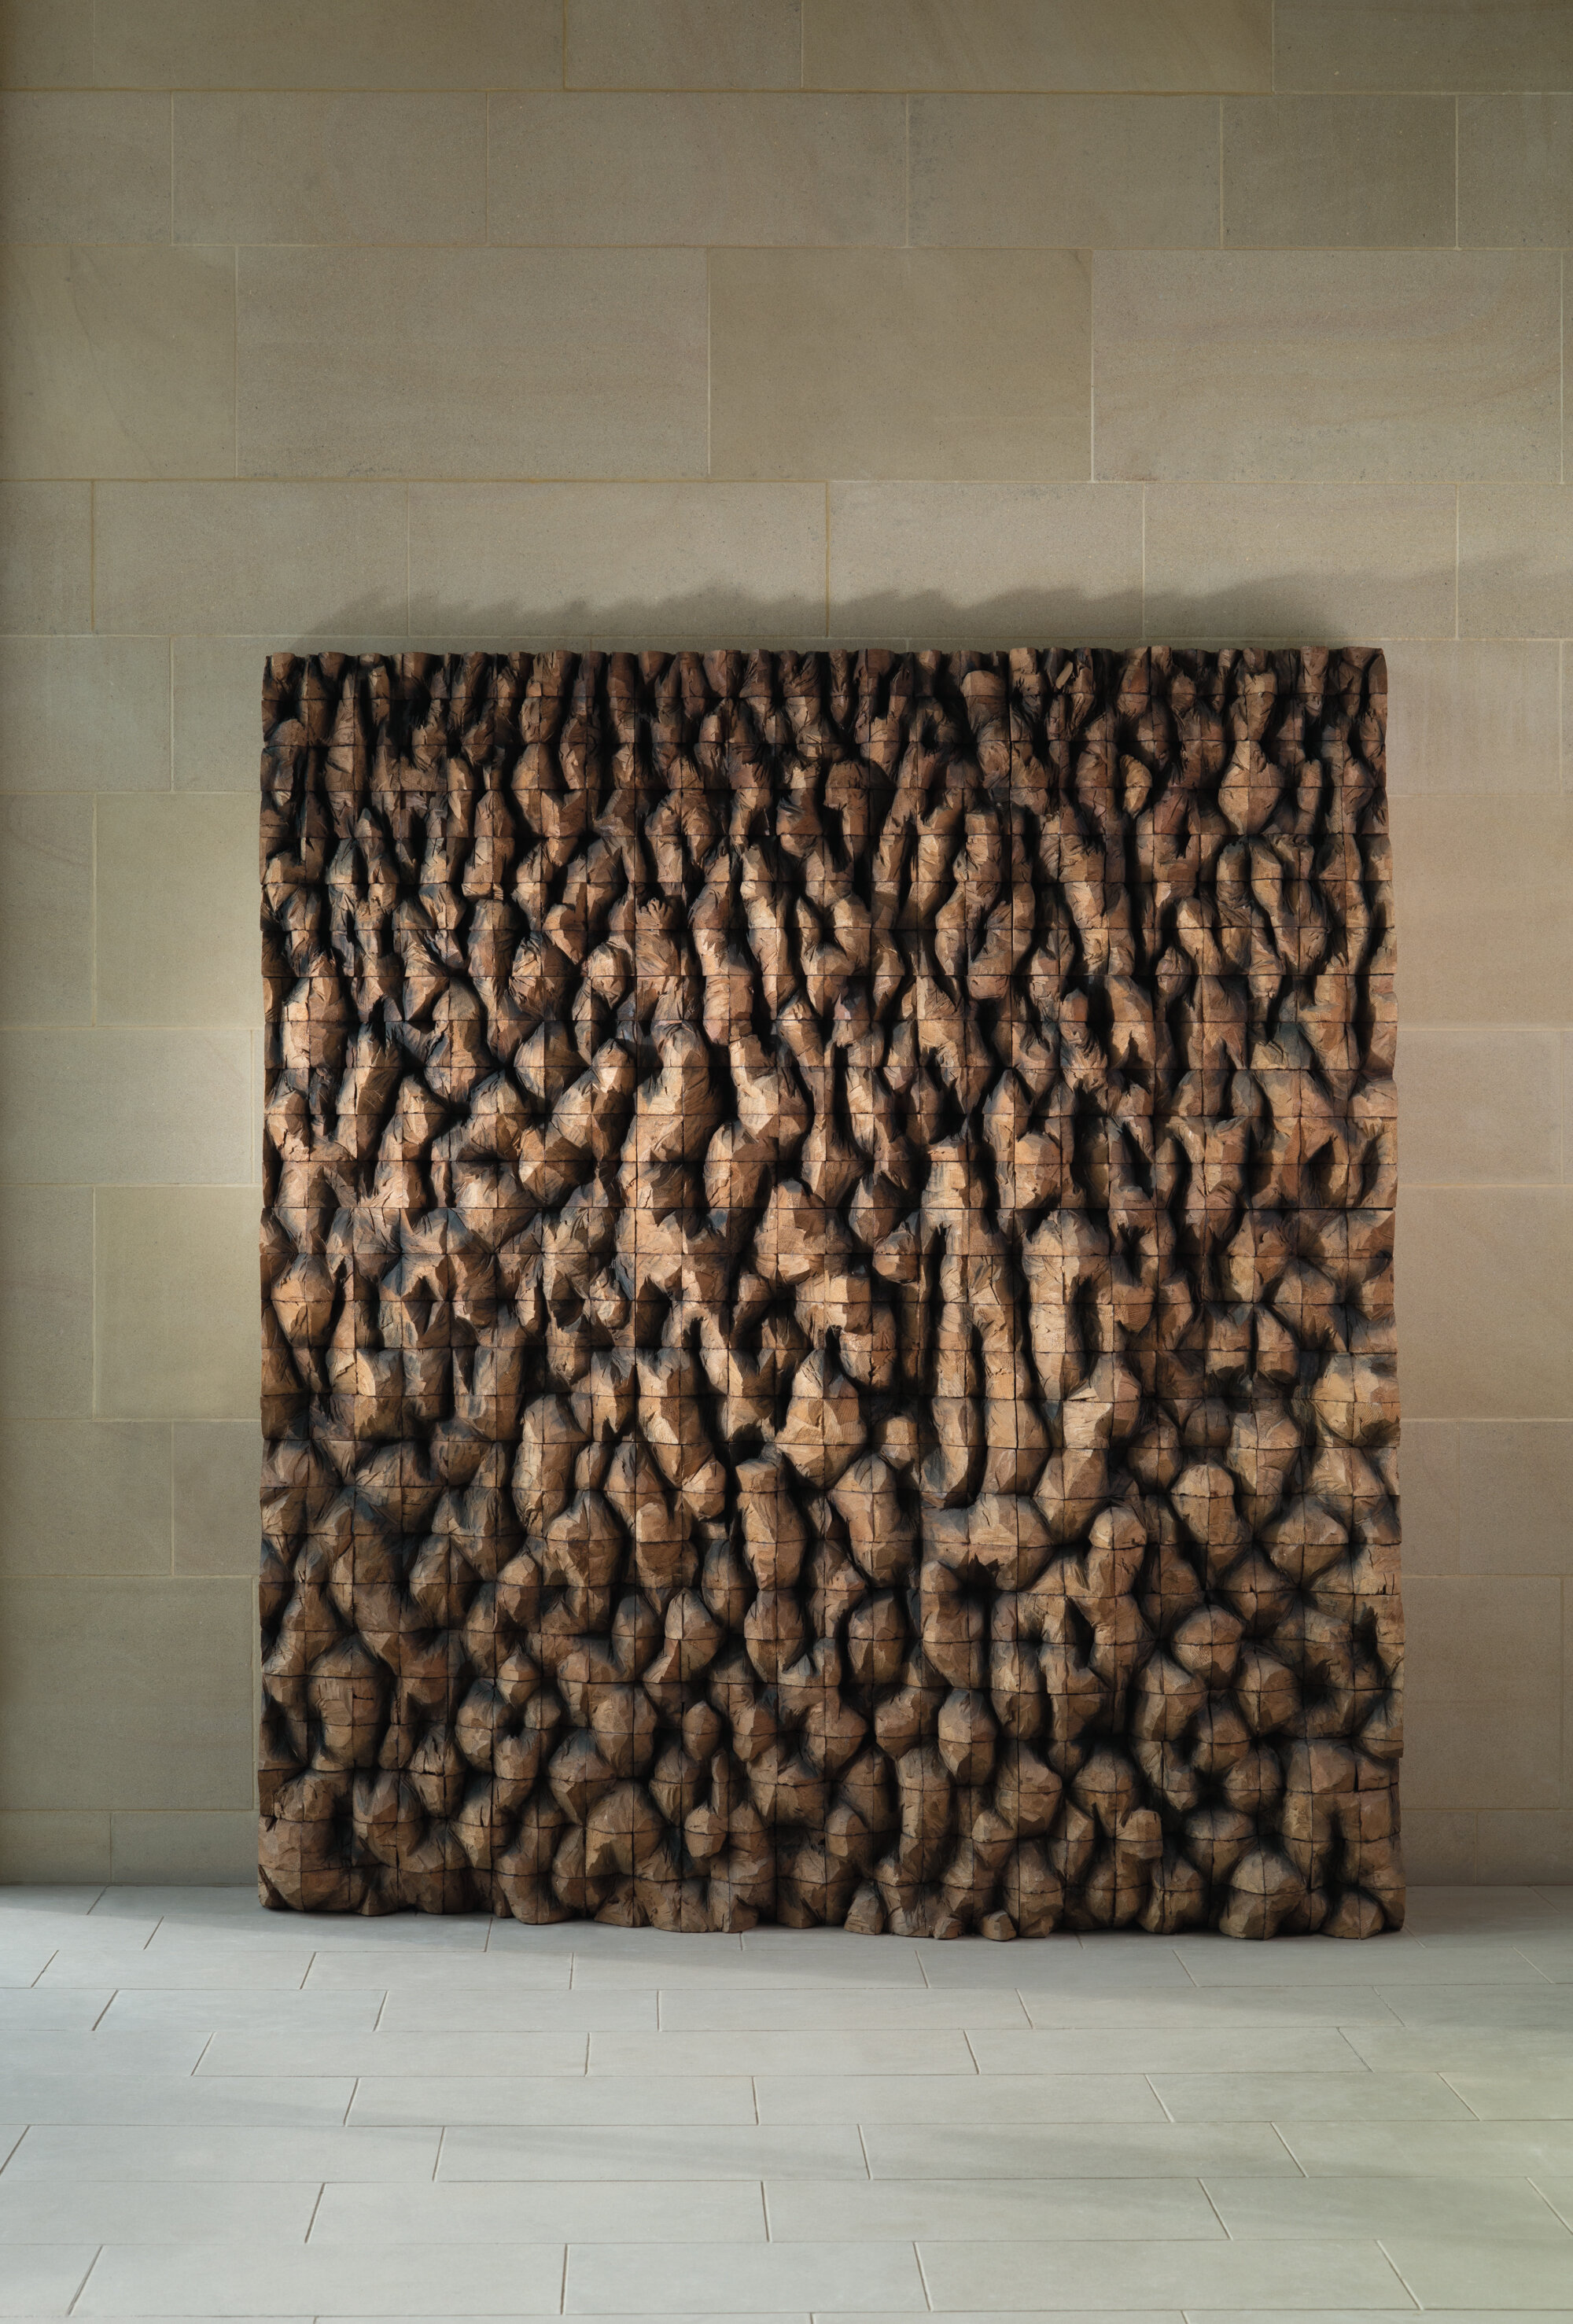       Crossed Mirage , 2011 Cedar and graphite 93 x 82.5 x 32 in.    MORE IMAGES   Princeton University Art Museum  